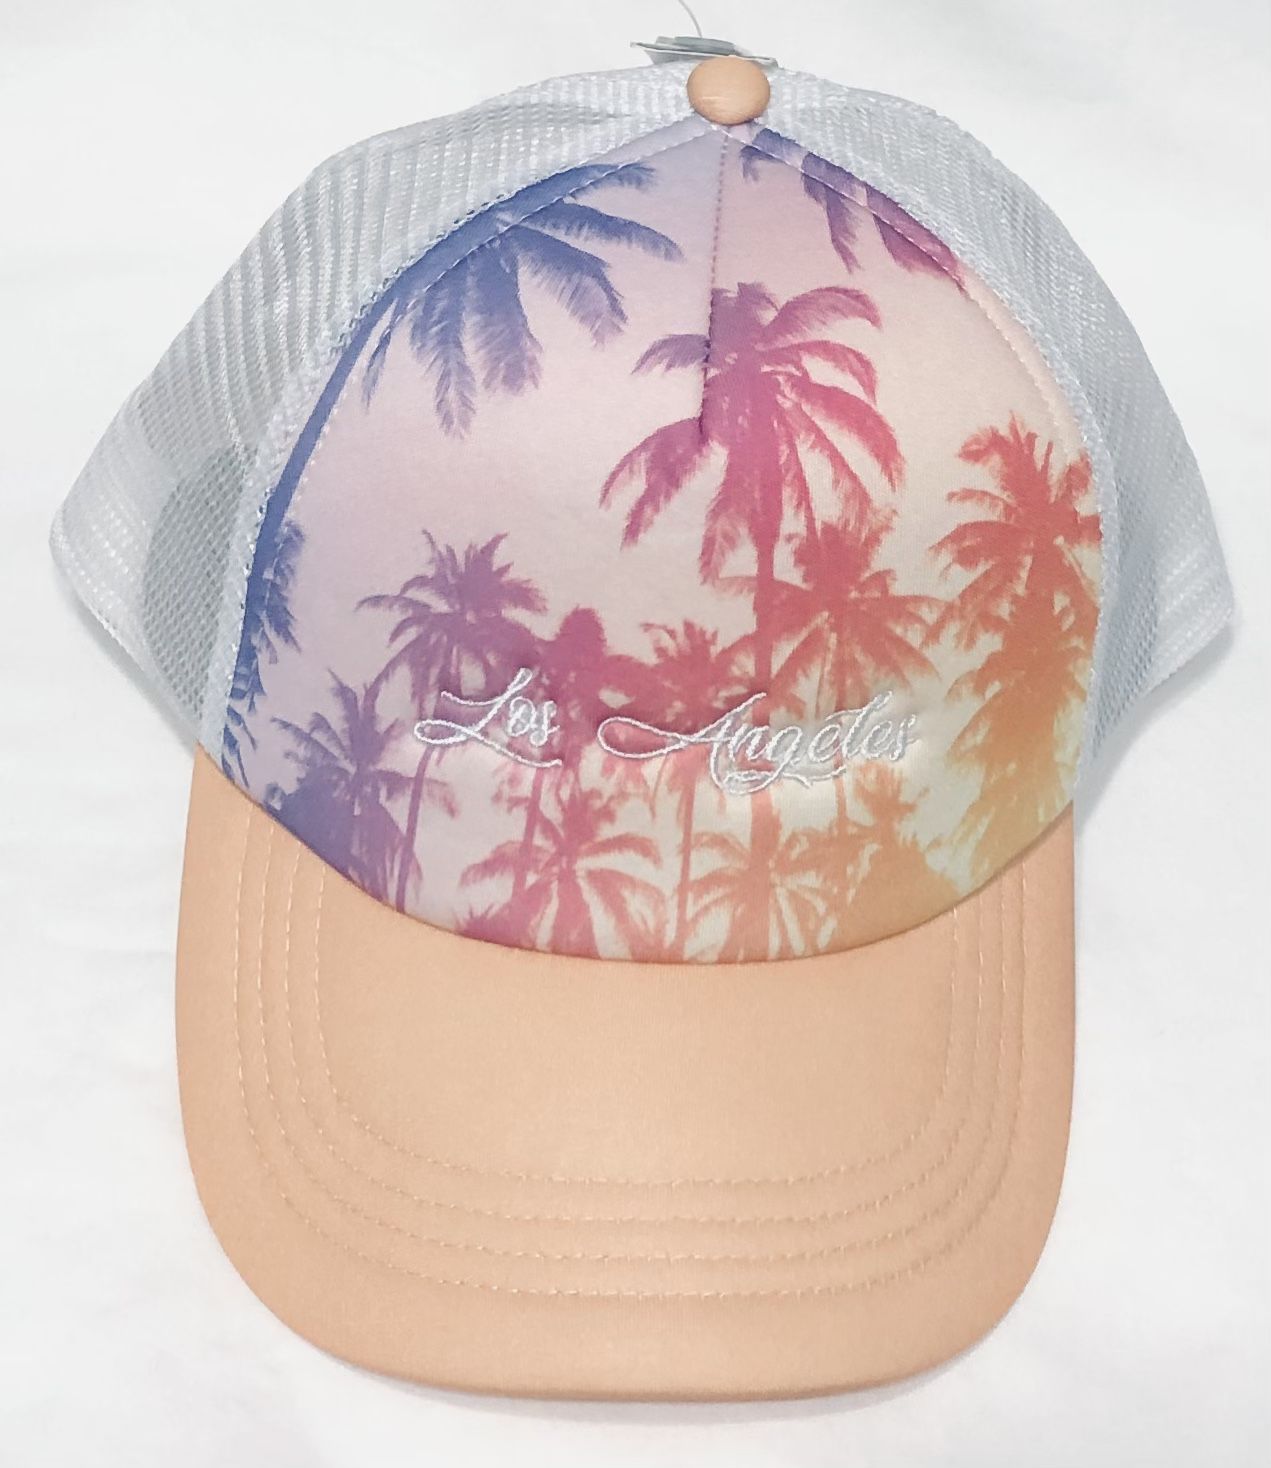 Los Angeles Trucker Hat Palm Tree graphic pink. One size.